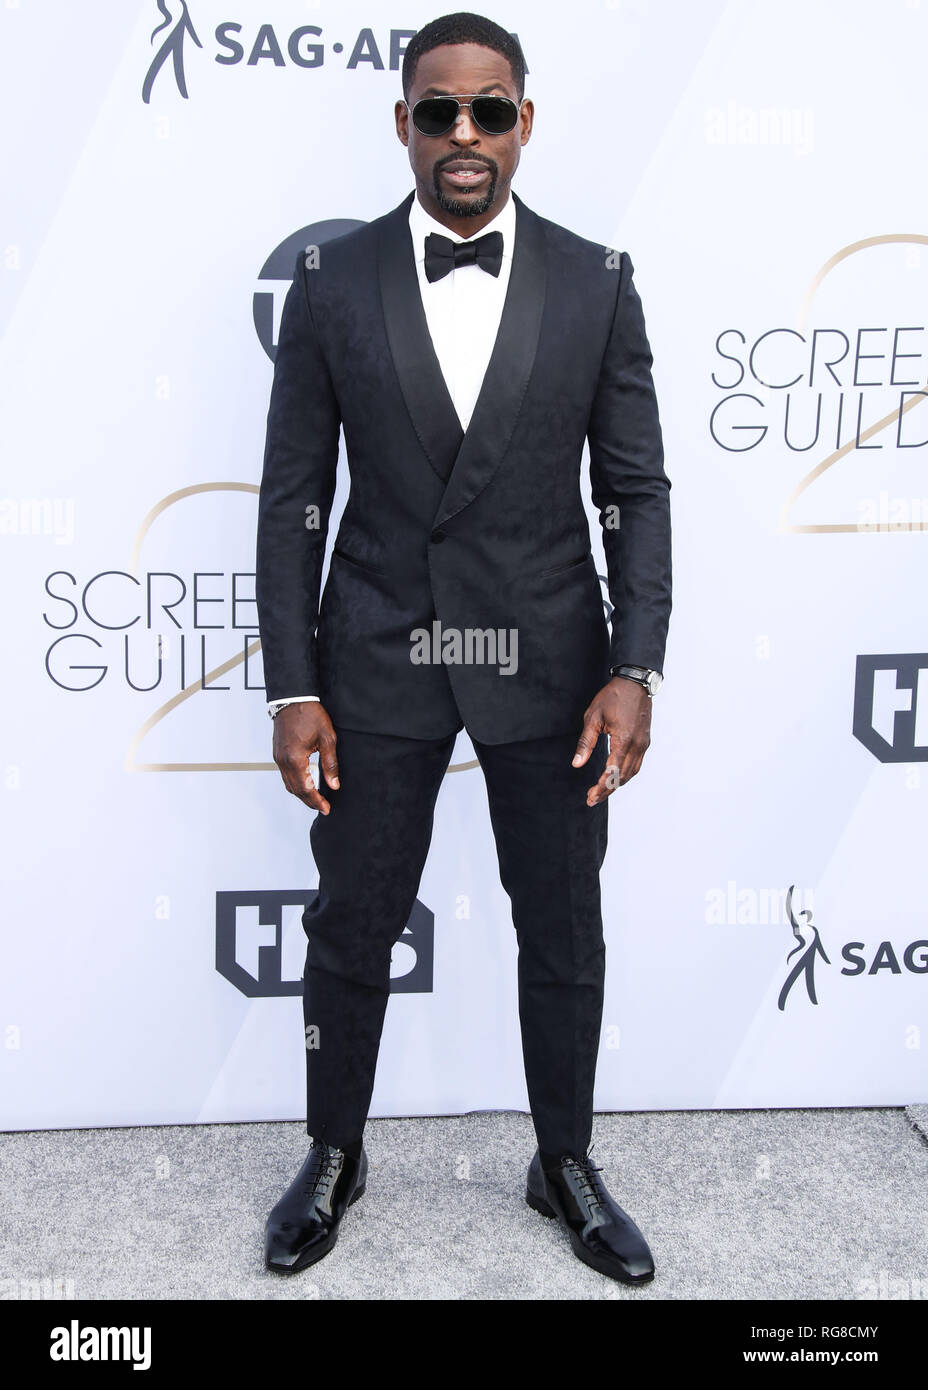 Los Angeles, United States. 27th Jan, 2019. LOS ANGELES, CA, USA - JANUARY  27: Actor Sterling K. Brown wearing a Zegna tux and shoes, IWC watch and  David Yurman cufflinks arrives at